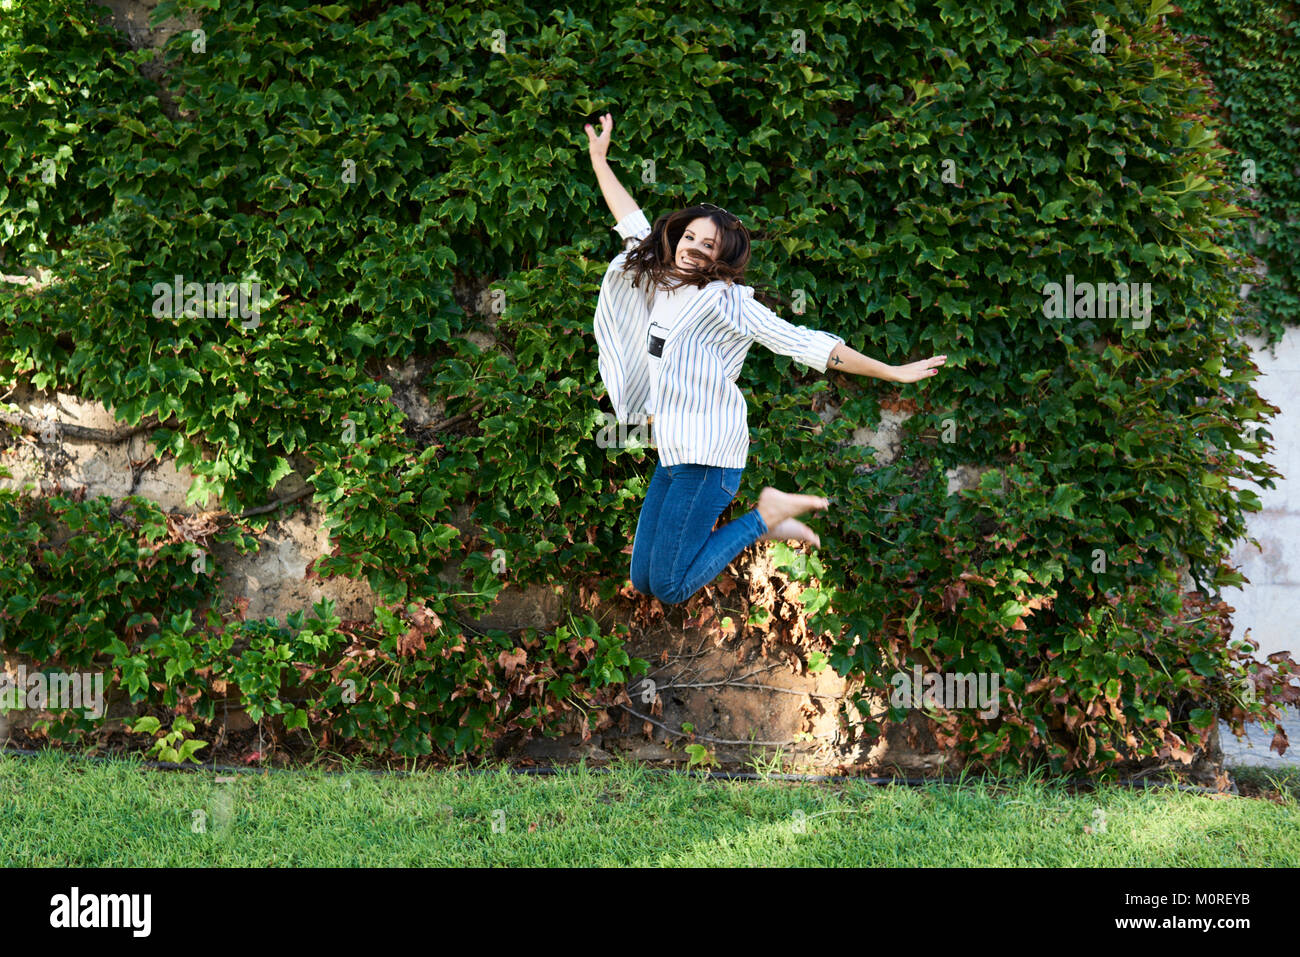 Happy millennial girl jumping freely against garden wall in summer. Stock Photo